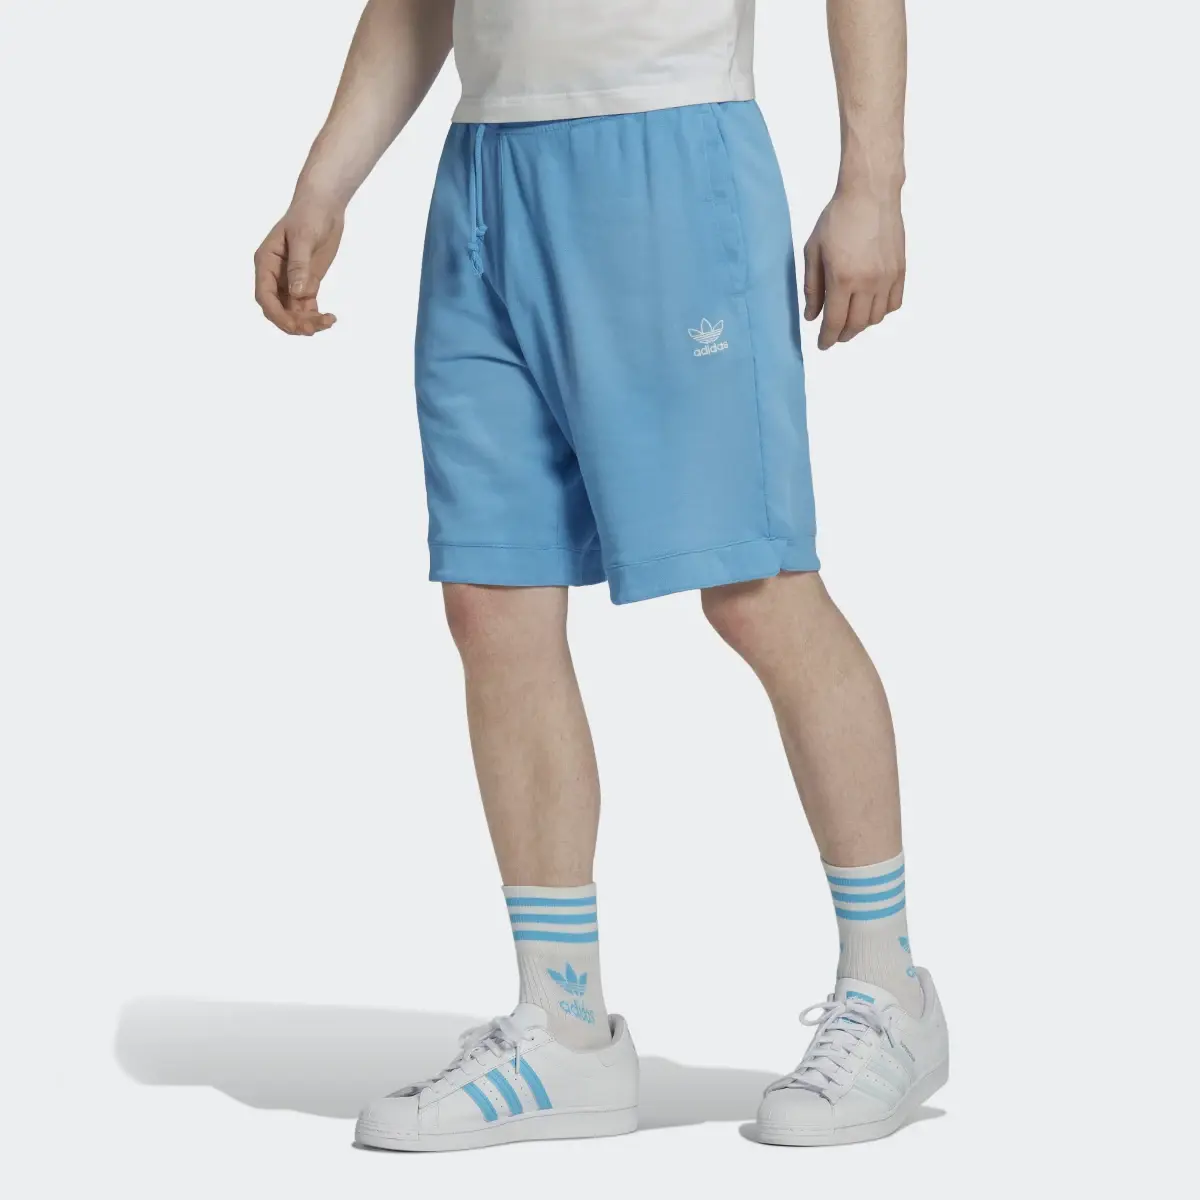 Adidas Essentials+ Made with Nature Shorts. 1